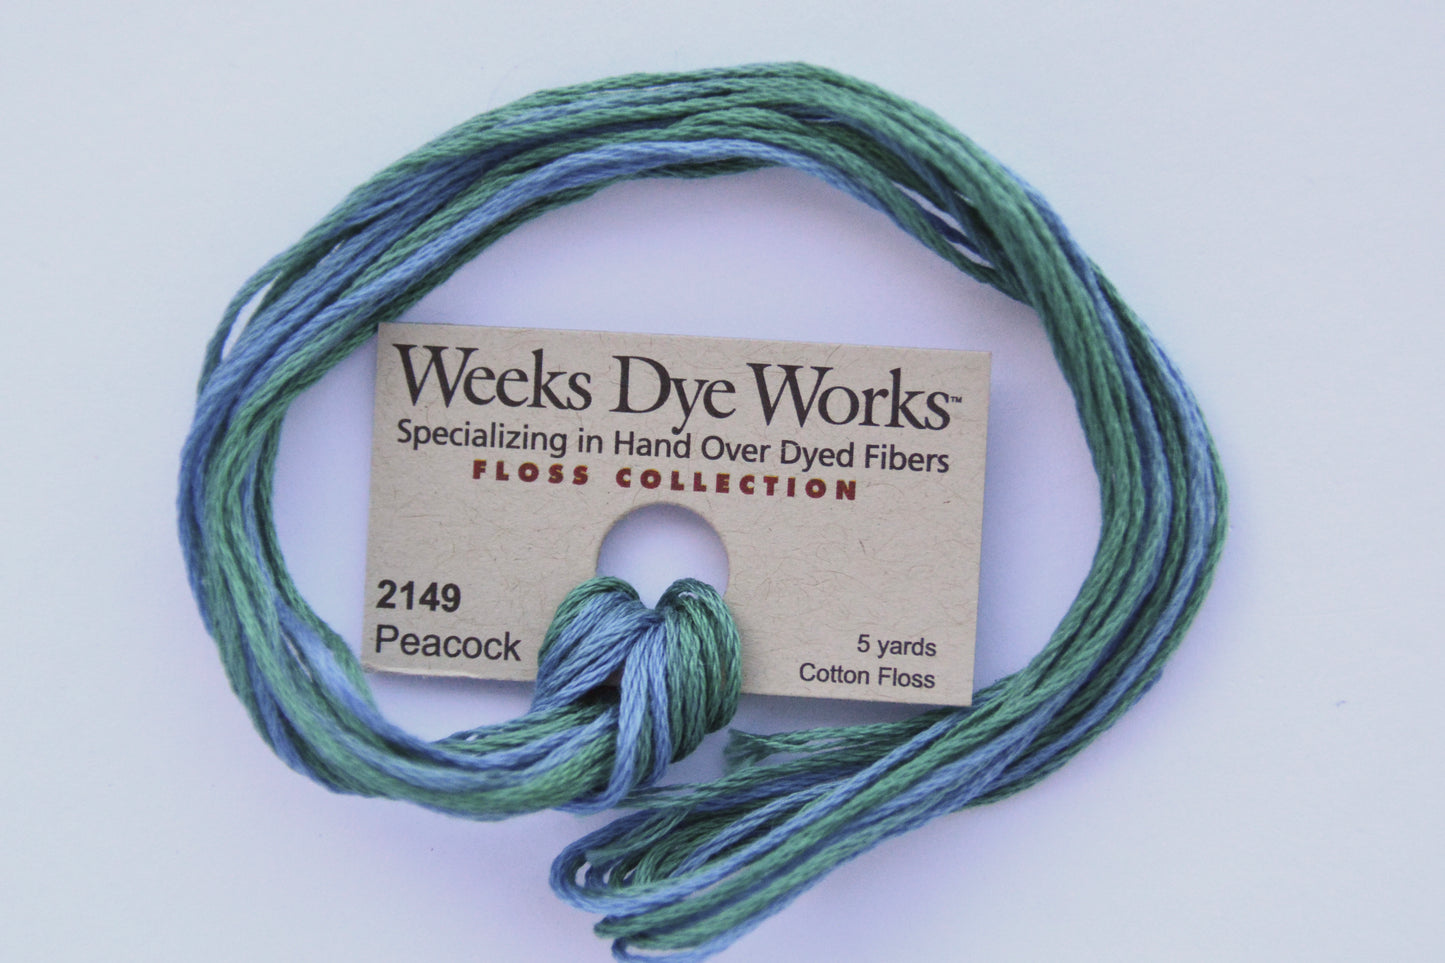 Peacock 2149 Weeks Dye Works 6-Strand Hand-Dyed Embroidery Floss